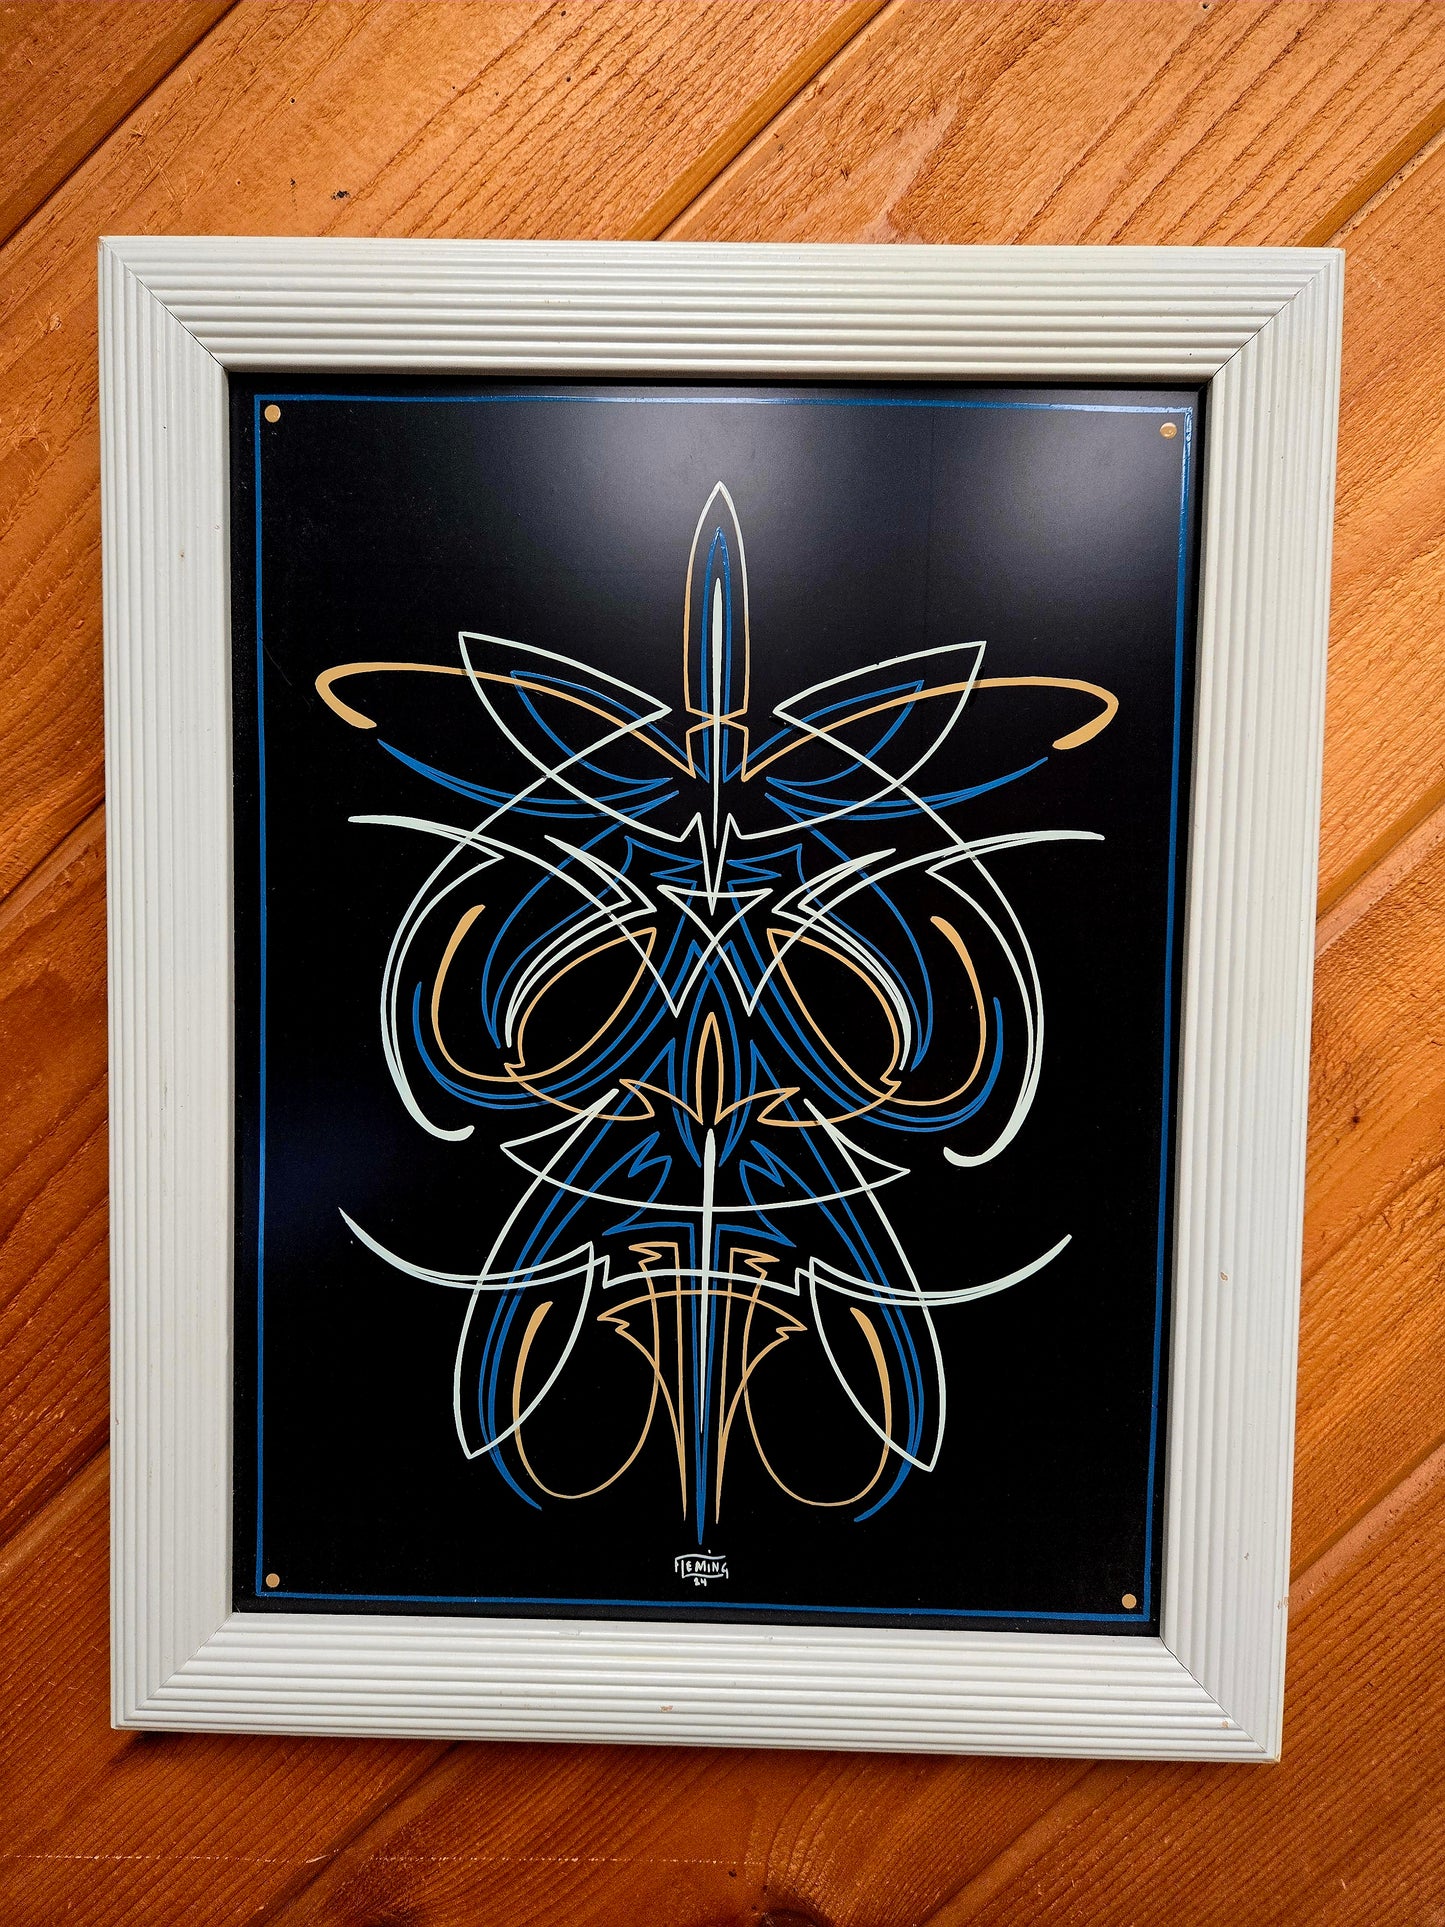 Framed Blue, White, and Tan Pinstriped Panel